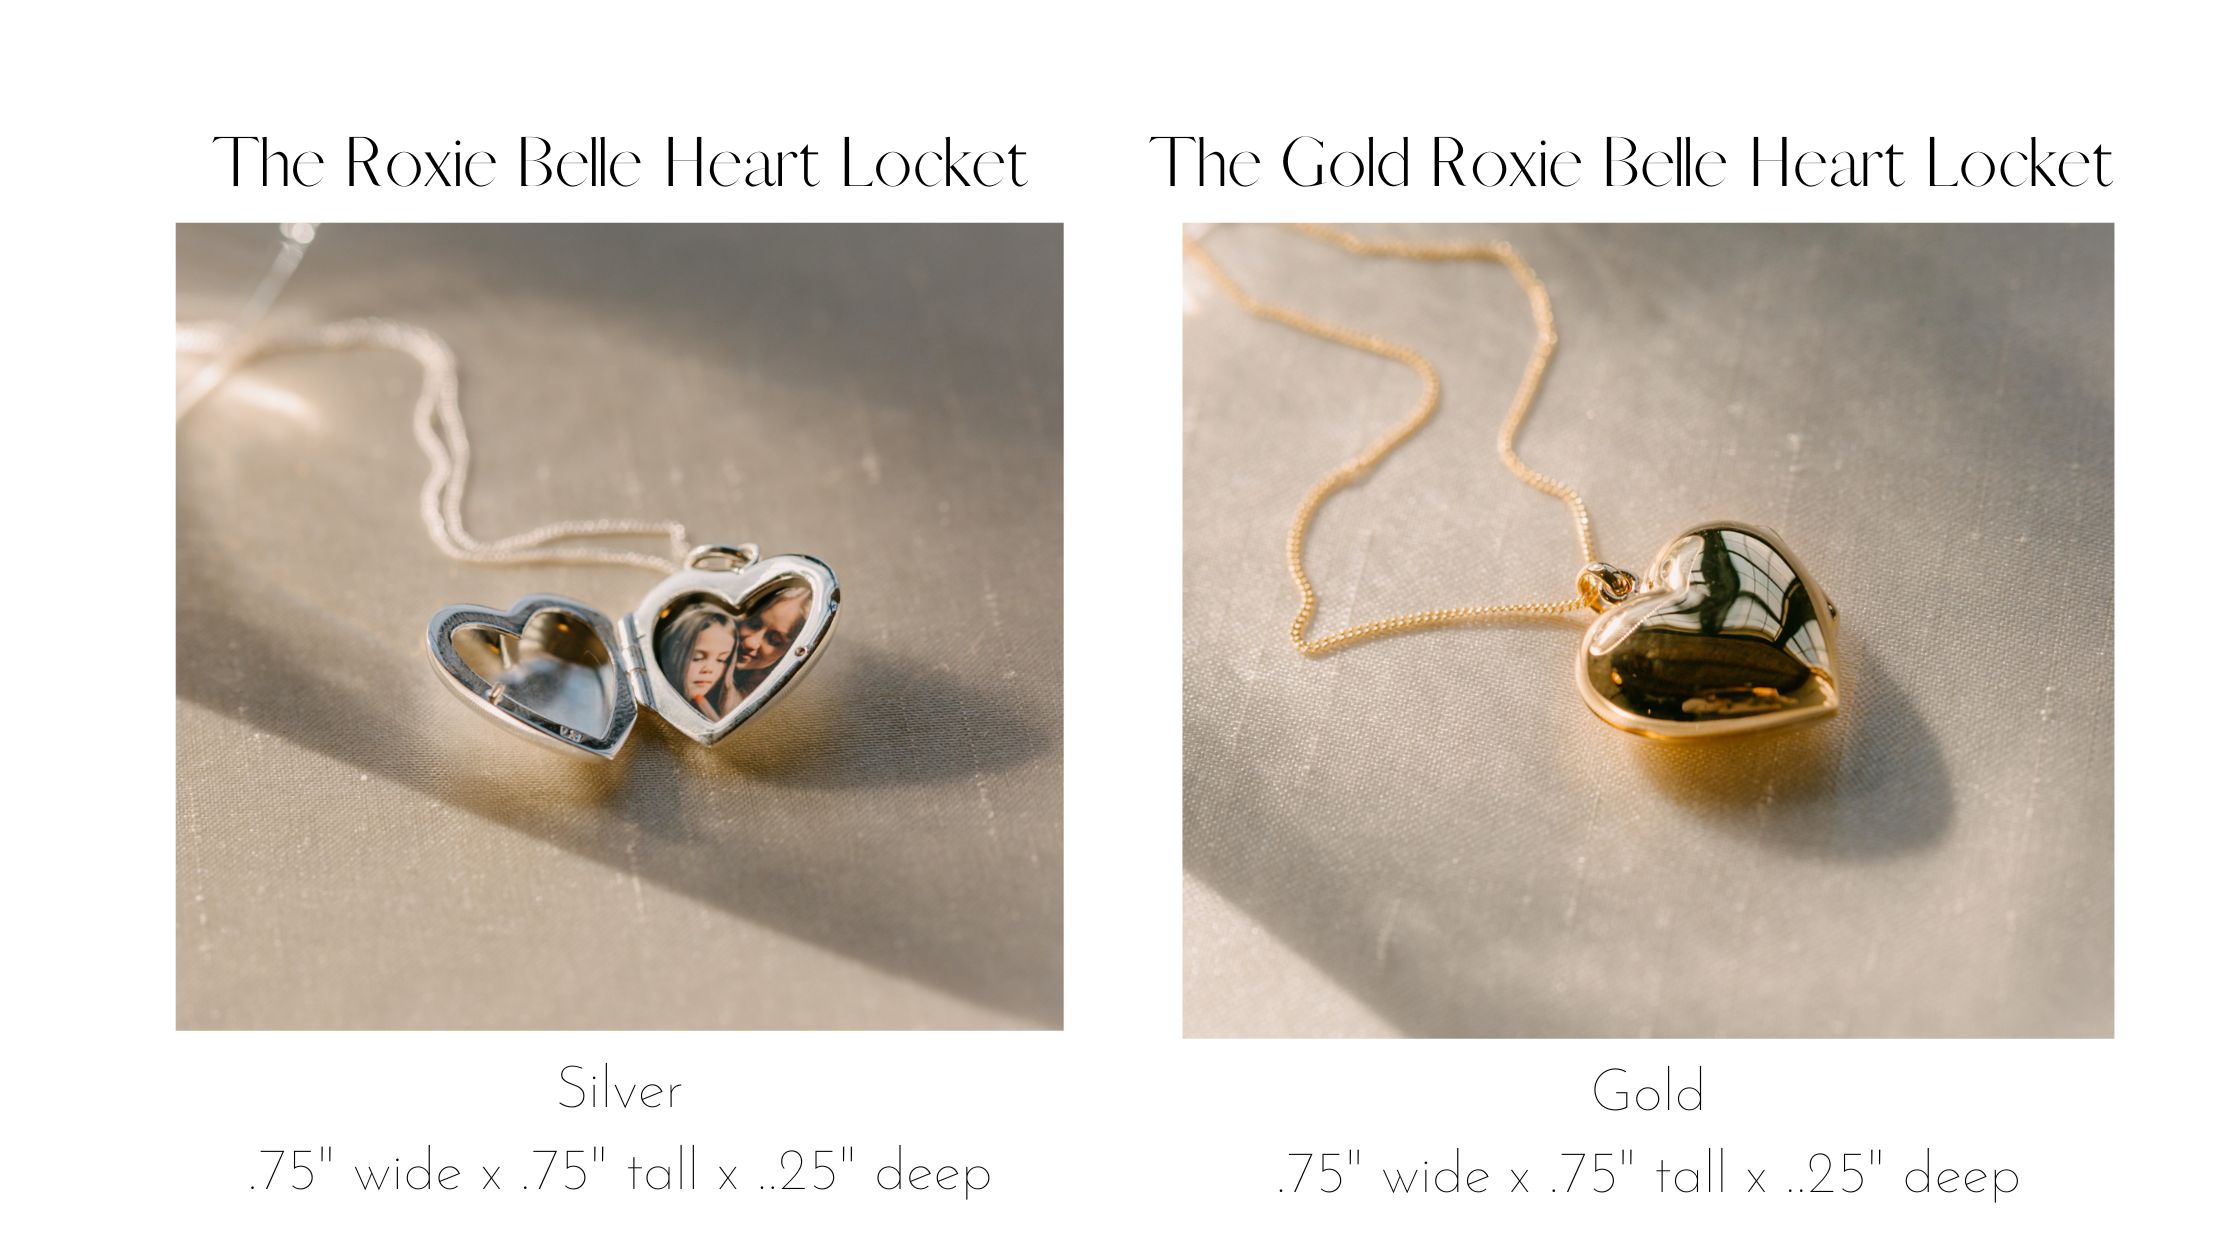 Silver and Gold Heart Lockets that hold photos